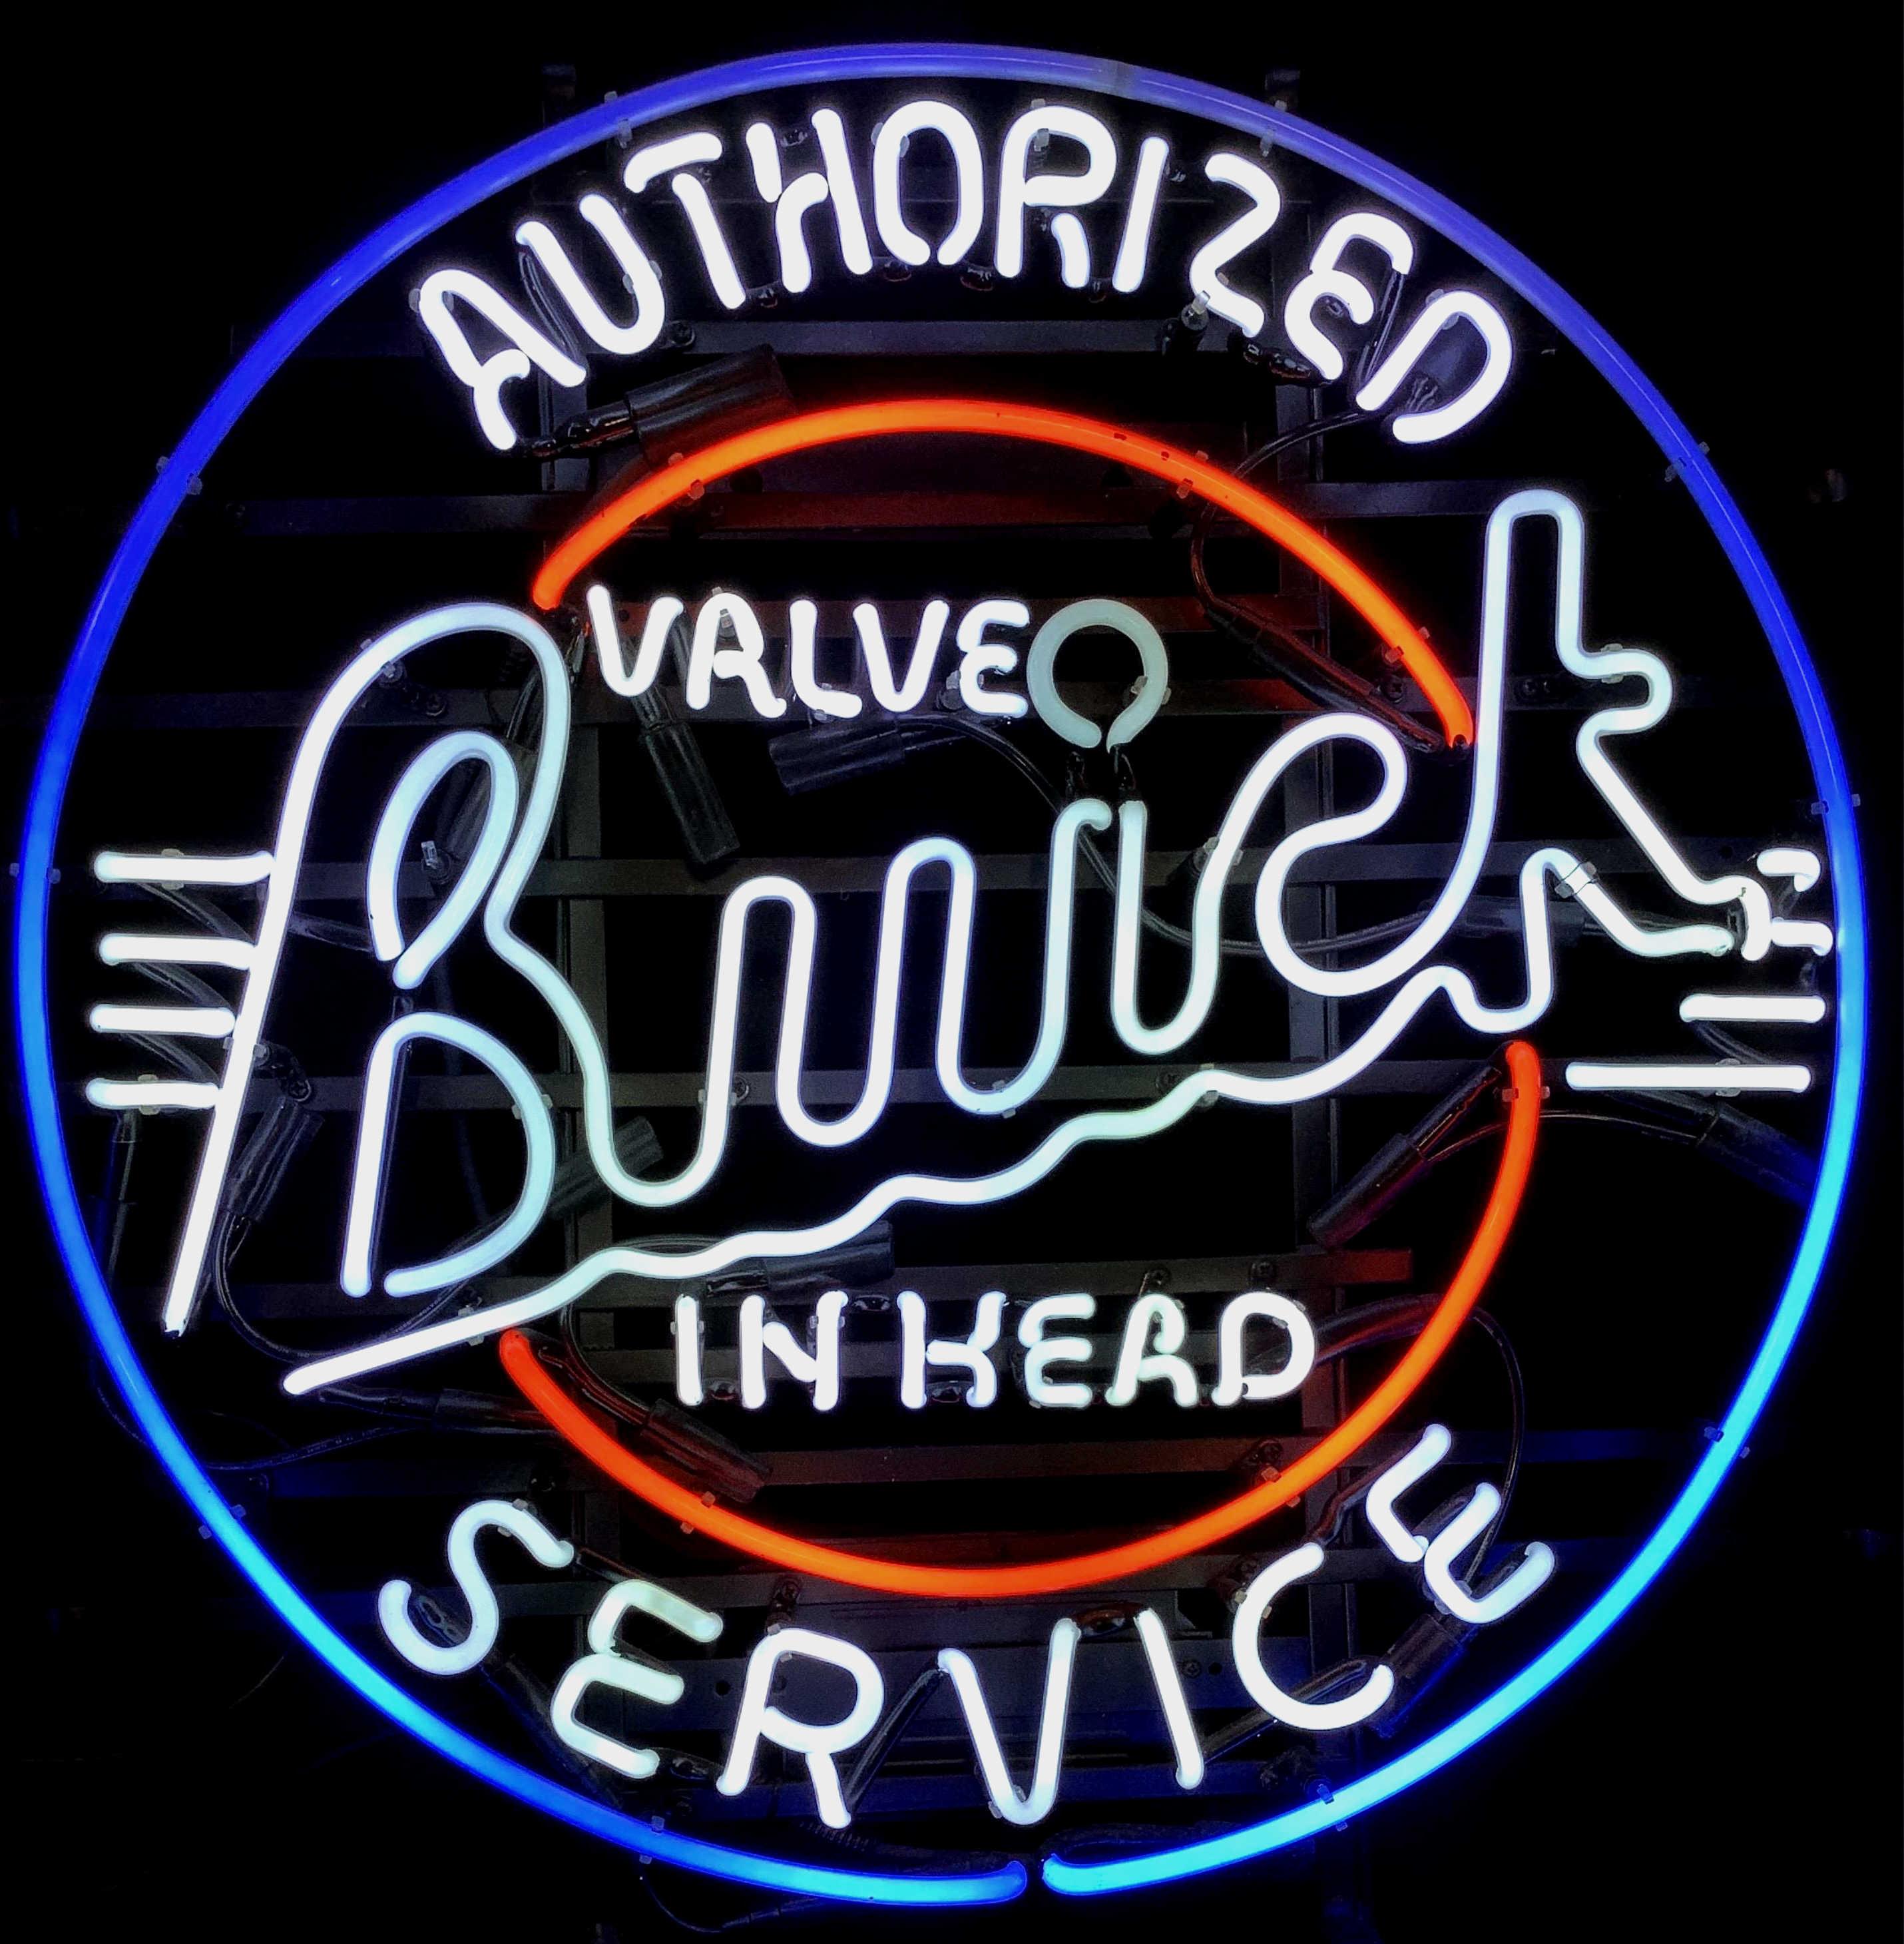 Vintage Neon Buick Advertising Sign